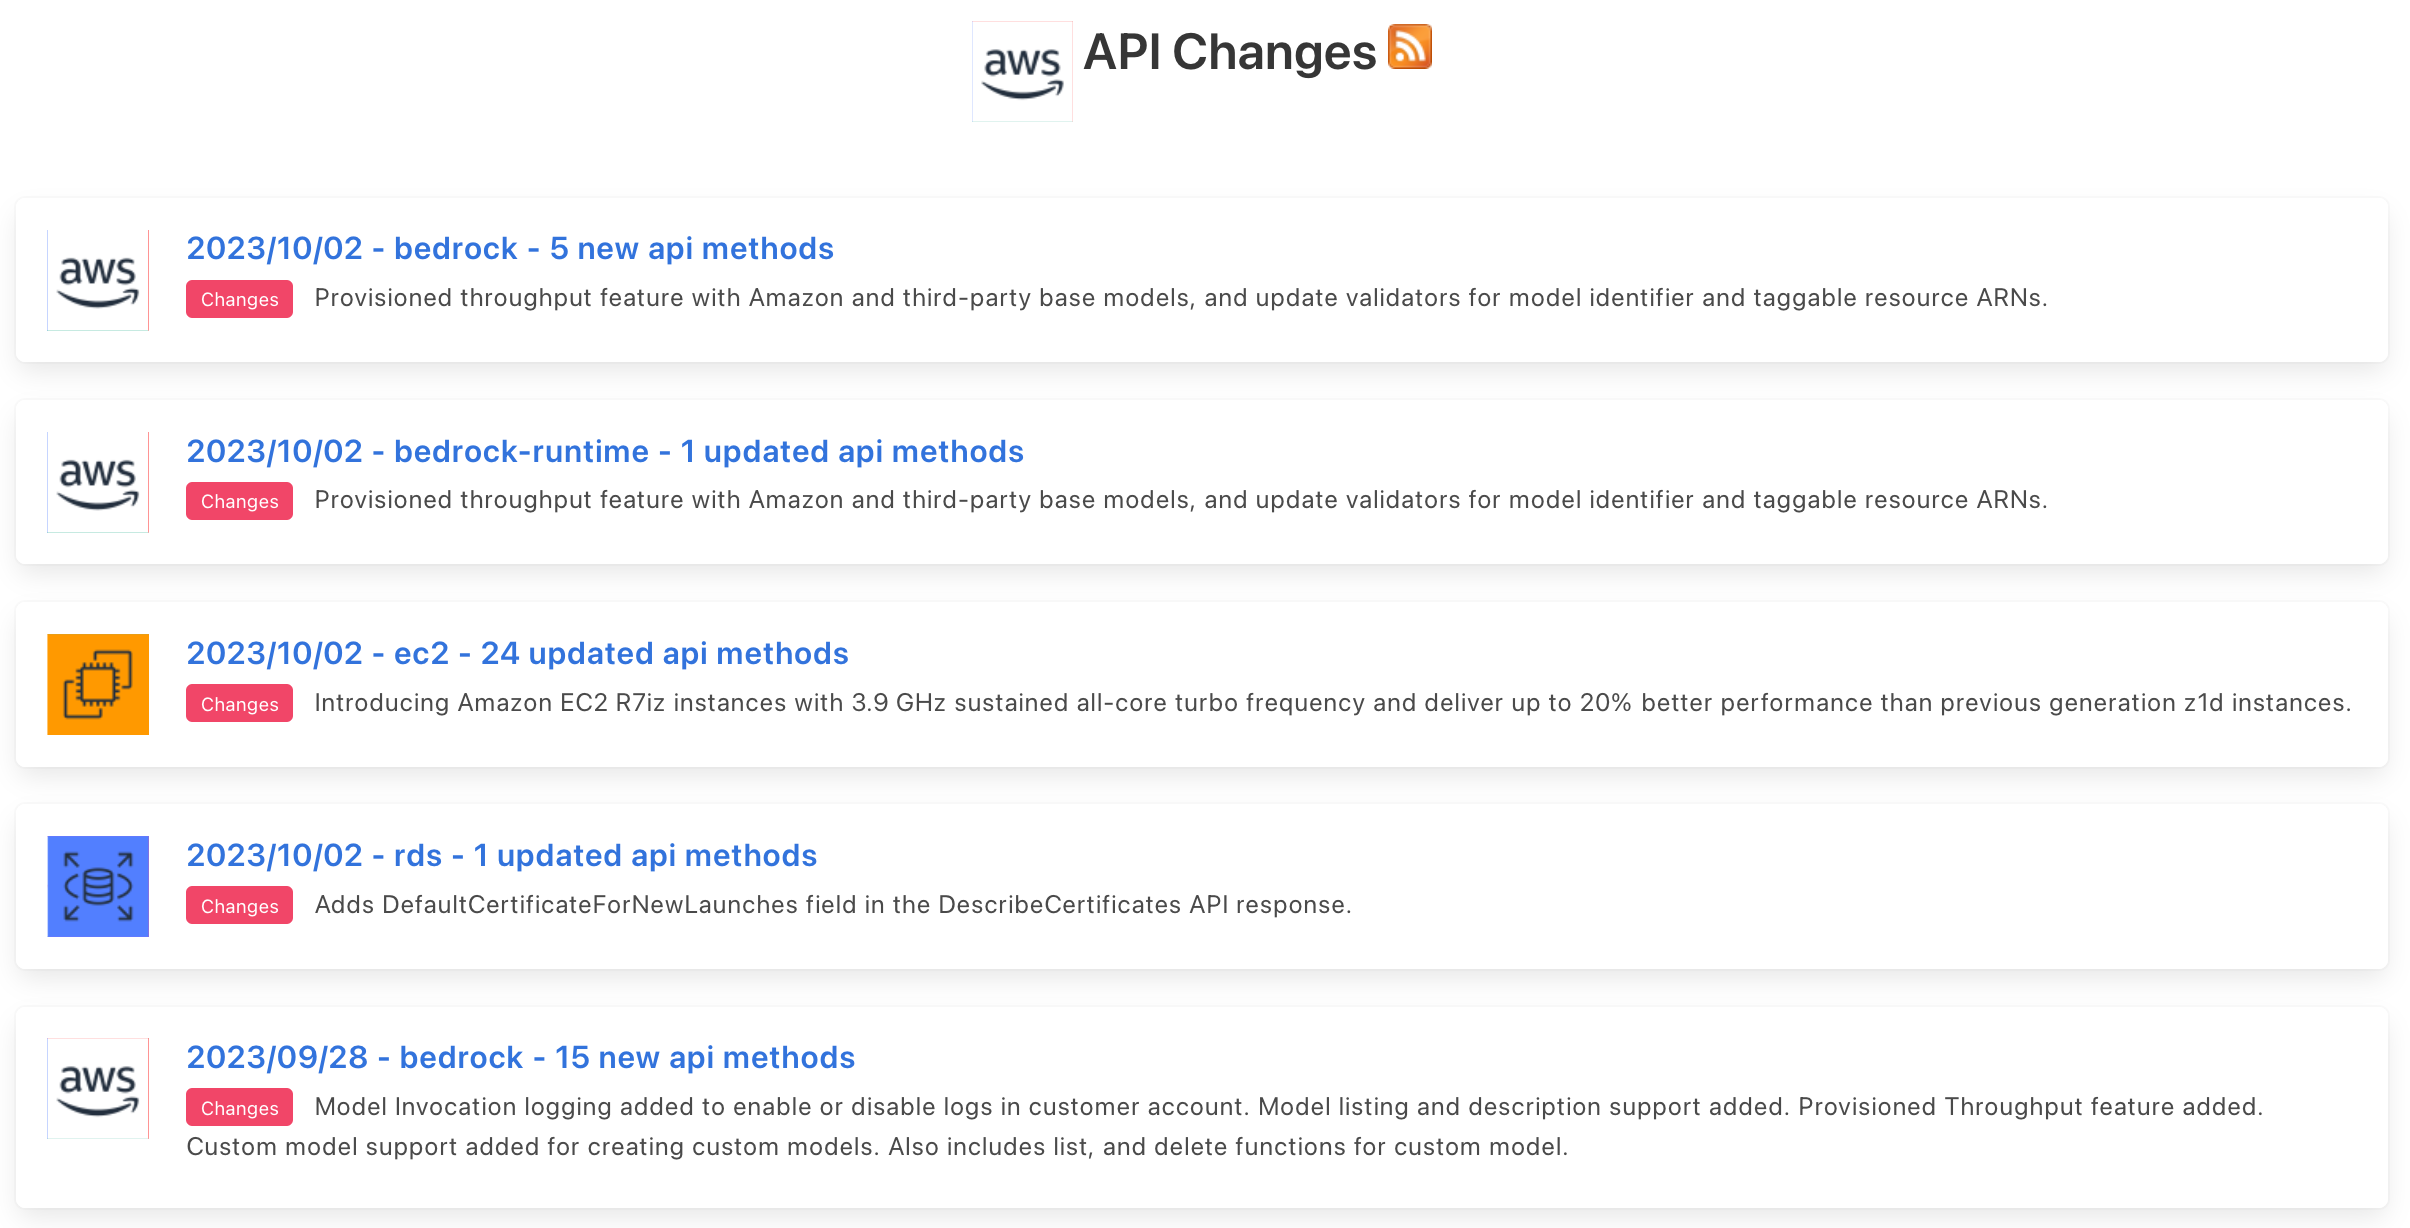 APIs change frequently